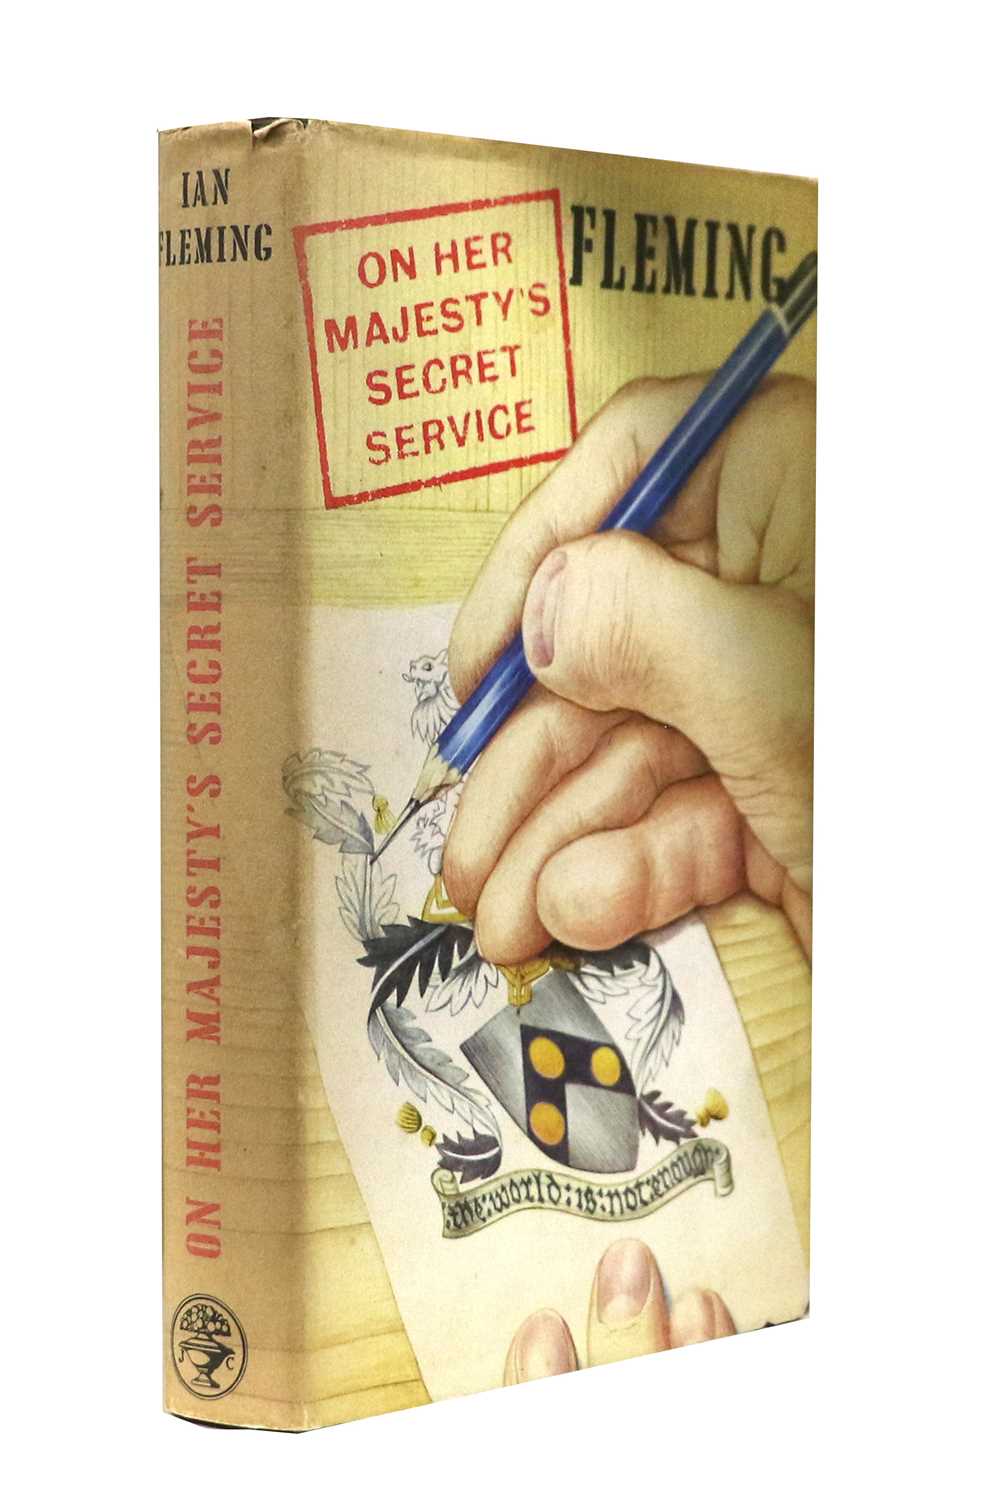 Fleming (Ian). On Her Majesty’s Secret Service. Jonathan Cape, 1963, first edition, dust jacket (